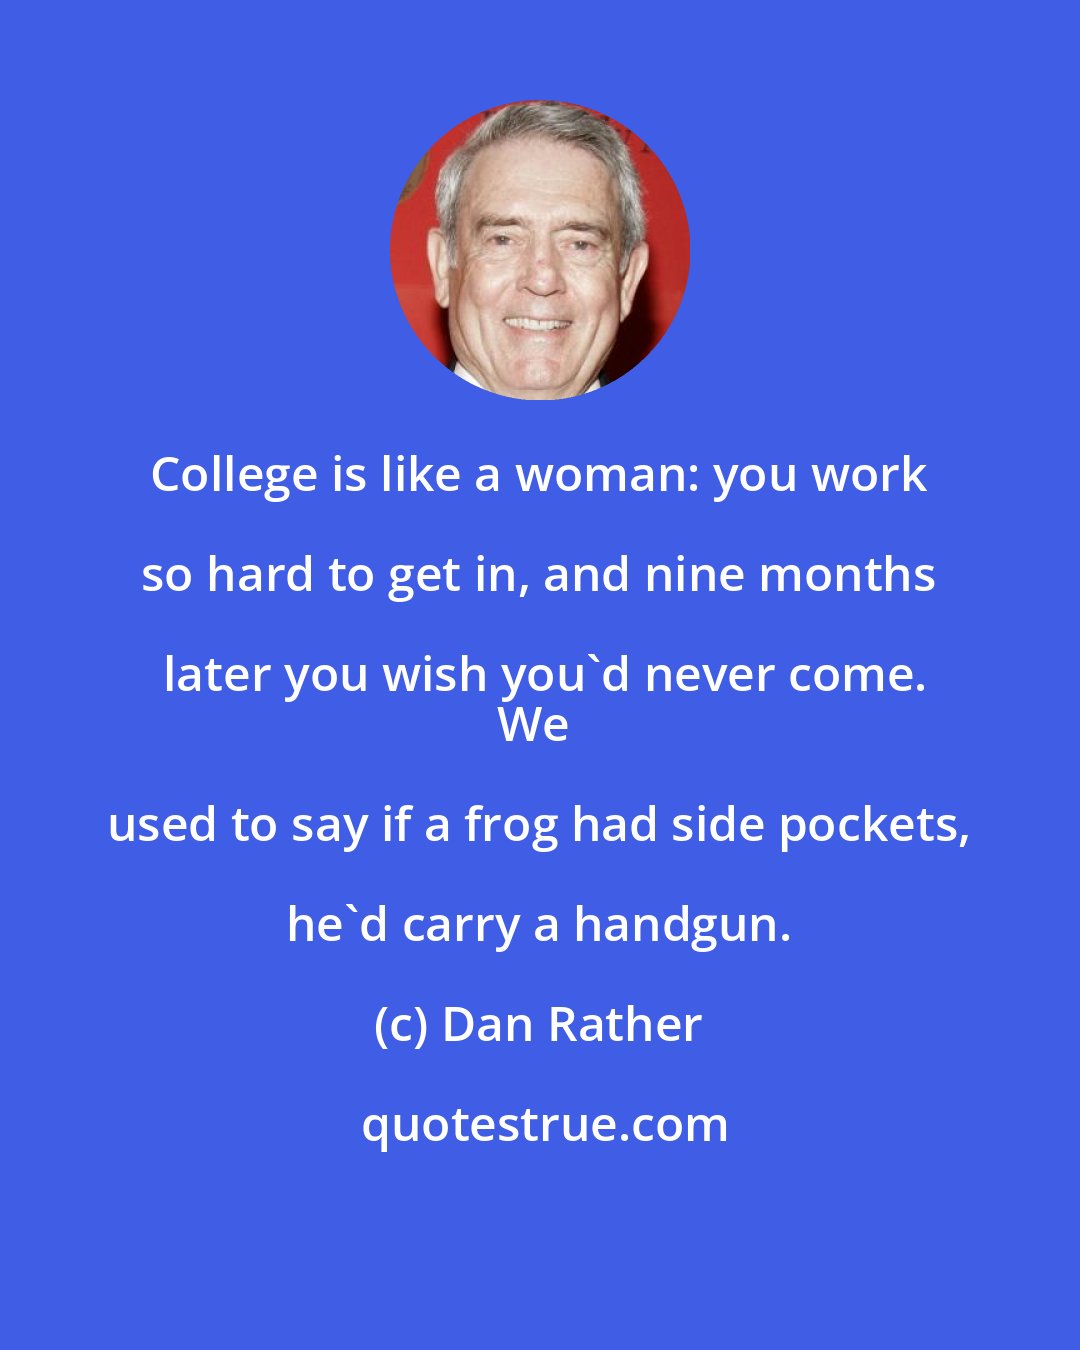 Dan Rather: College is like a woman: you work so hard to get in, and nine months later you wish you'd never come.
We used to say if a frog had side pockets, he'd carry a handgun.